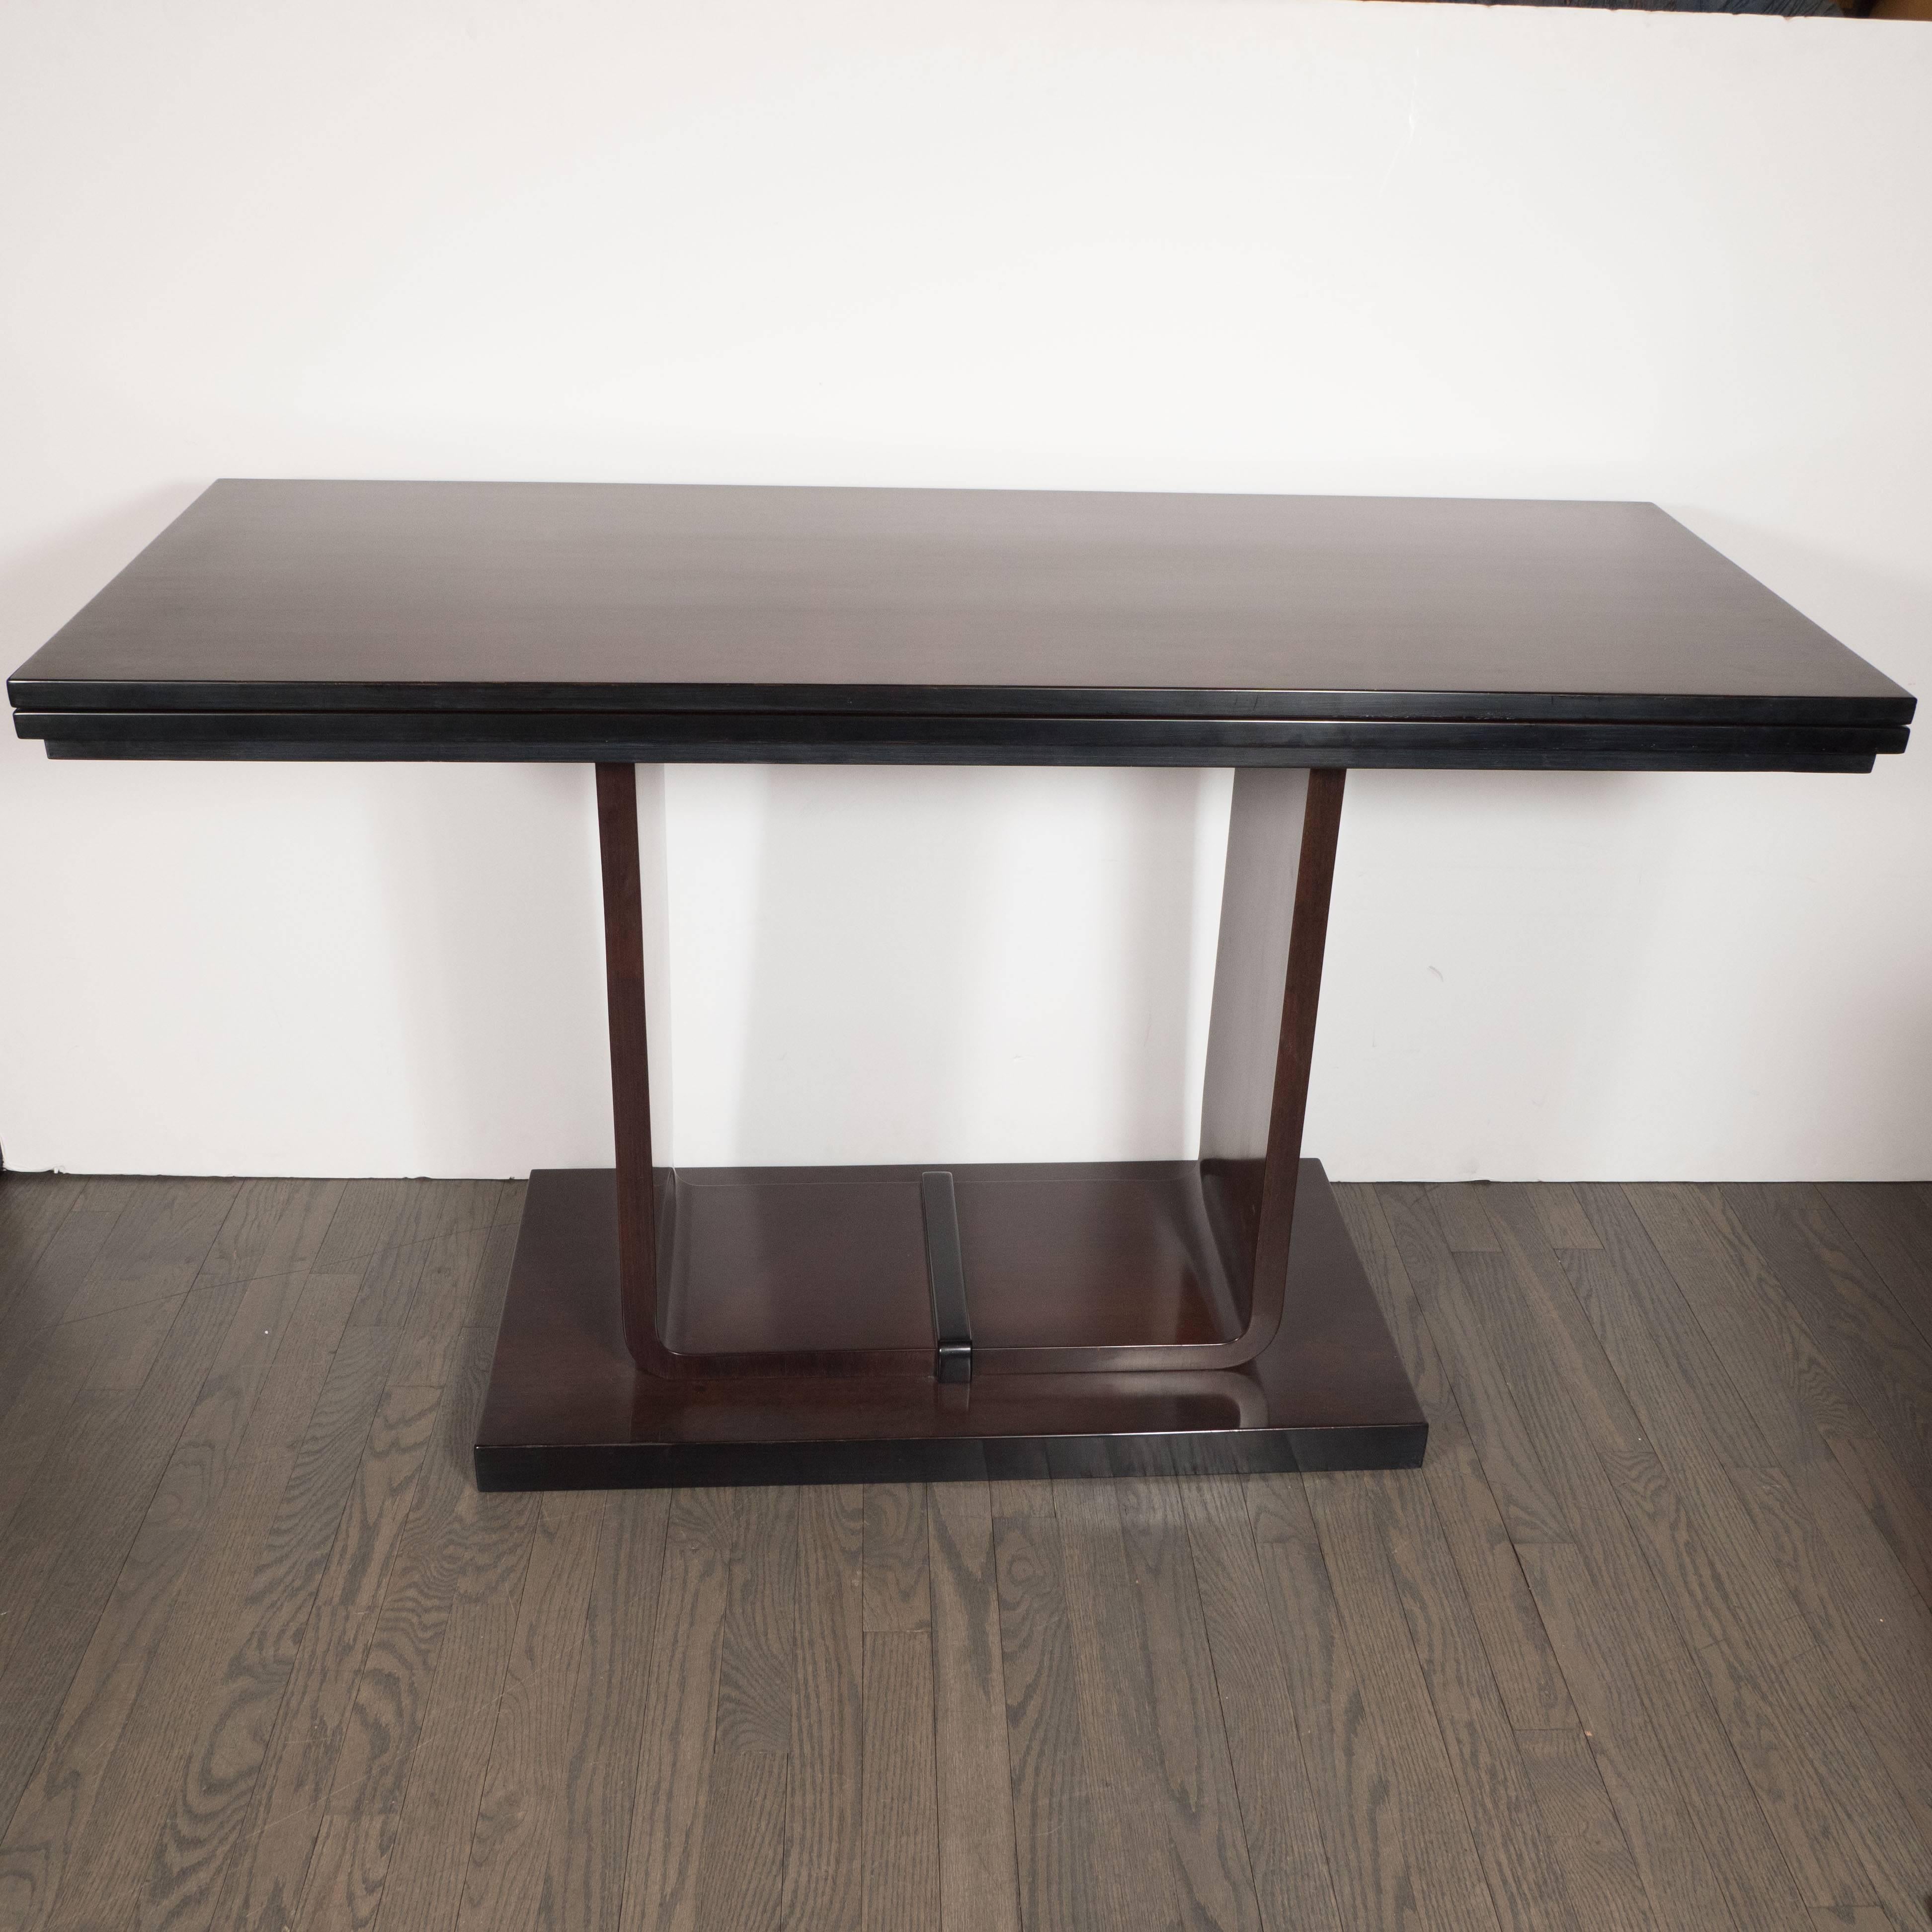 This refined Art Deco Skyscraper style Machine Age flip-top console or dining table was realized in the United States, circa 1935. Composed of book matched and burled Carpathian elm- that exhibits a particularly stunning woodgrain- this piece boasts